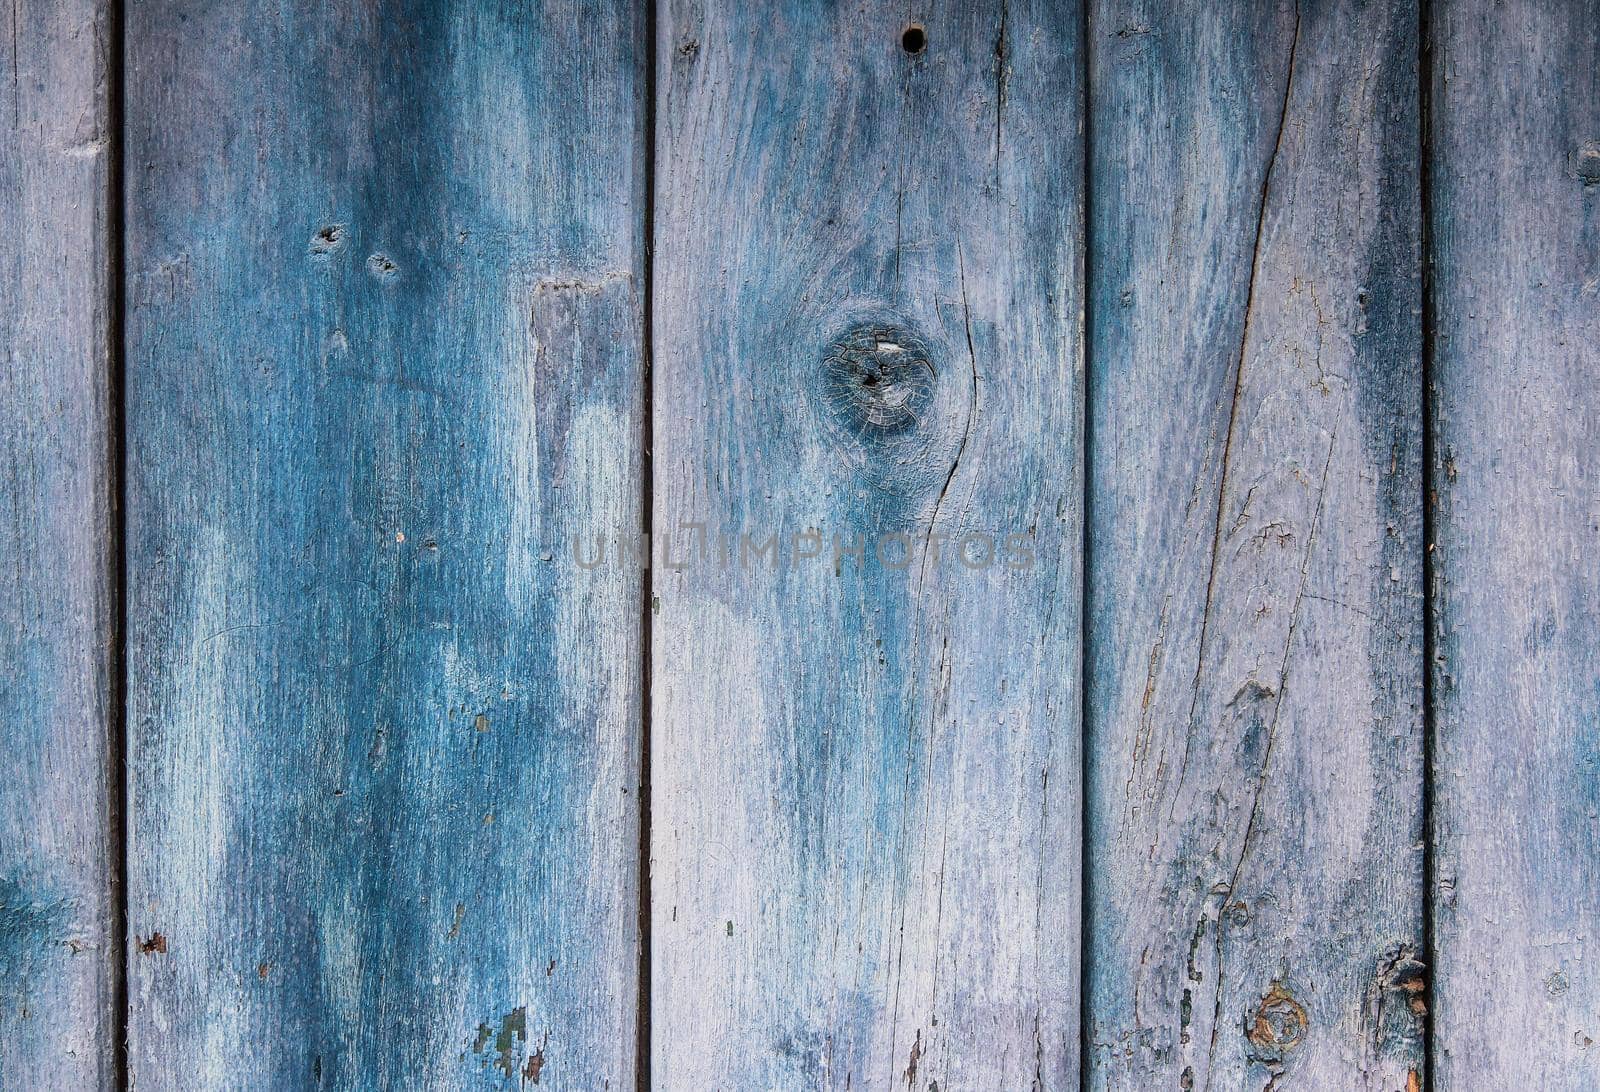 Faded vignette blue color on wooden board by Mibuch